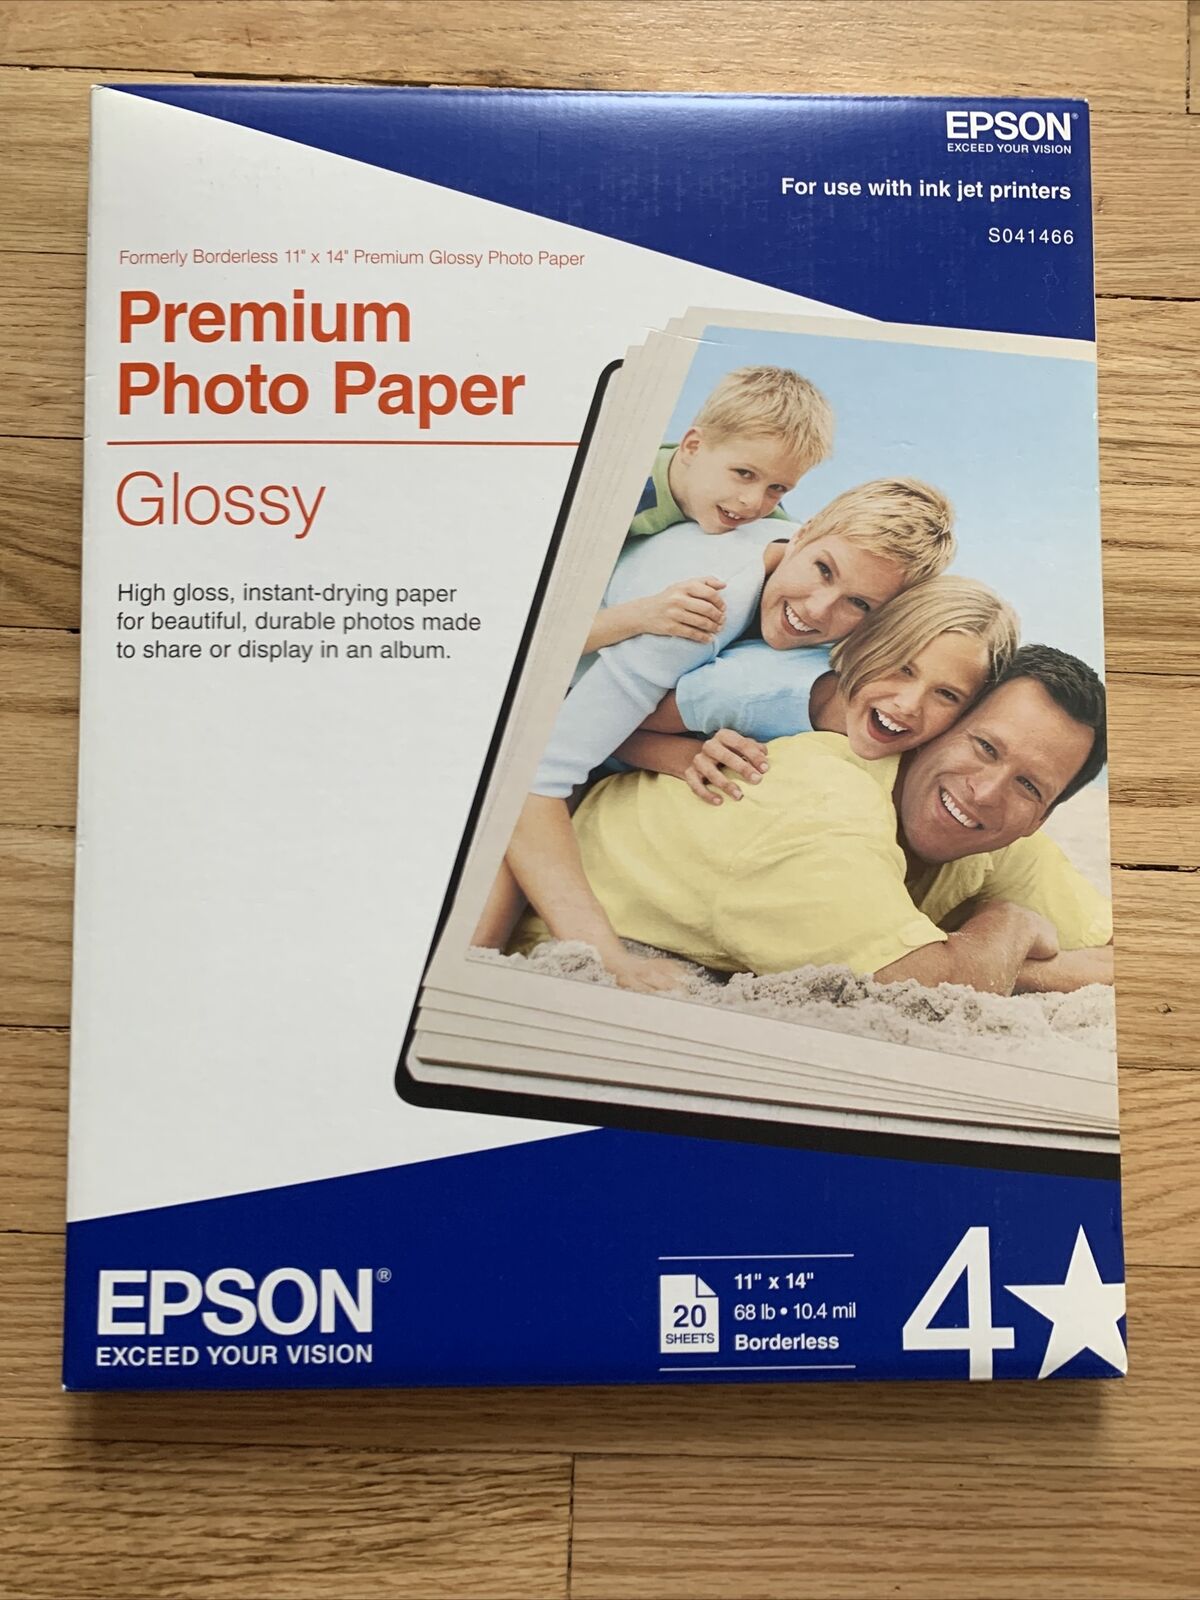 Brand New Epson Premium Photo Paper Glossy 20 Sheet Size 11x14 All Ink Jets